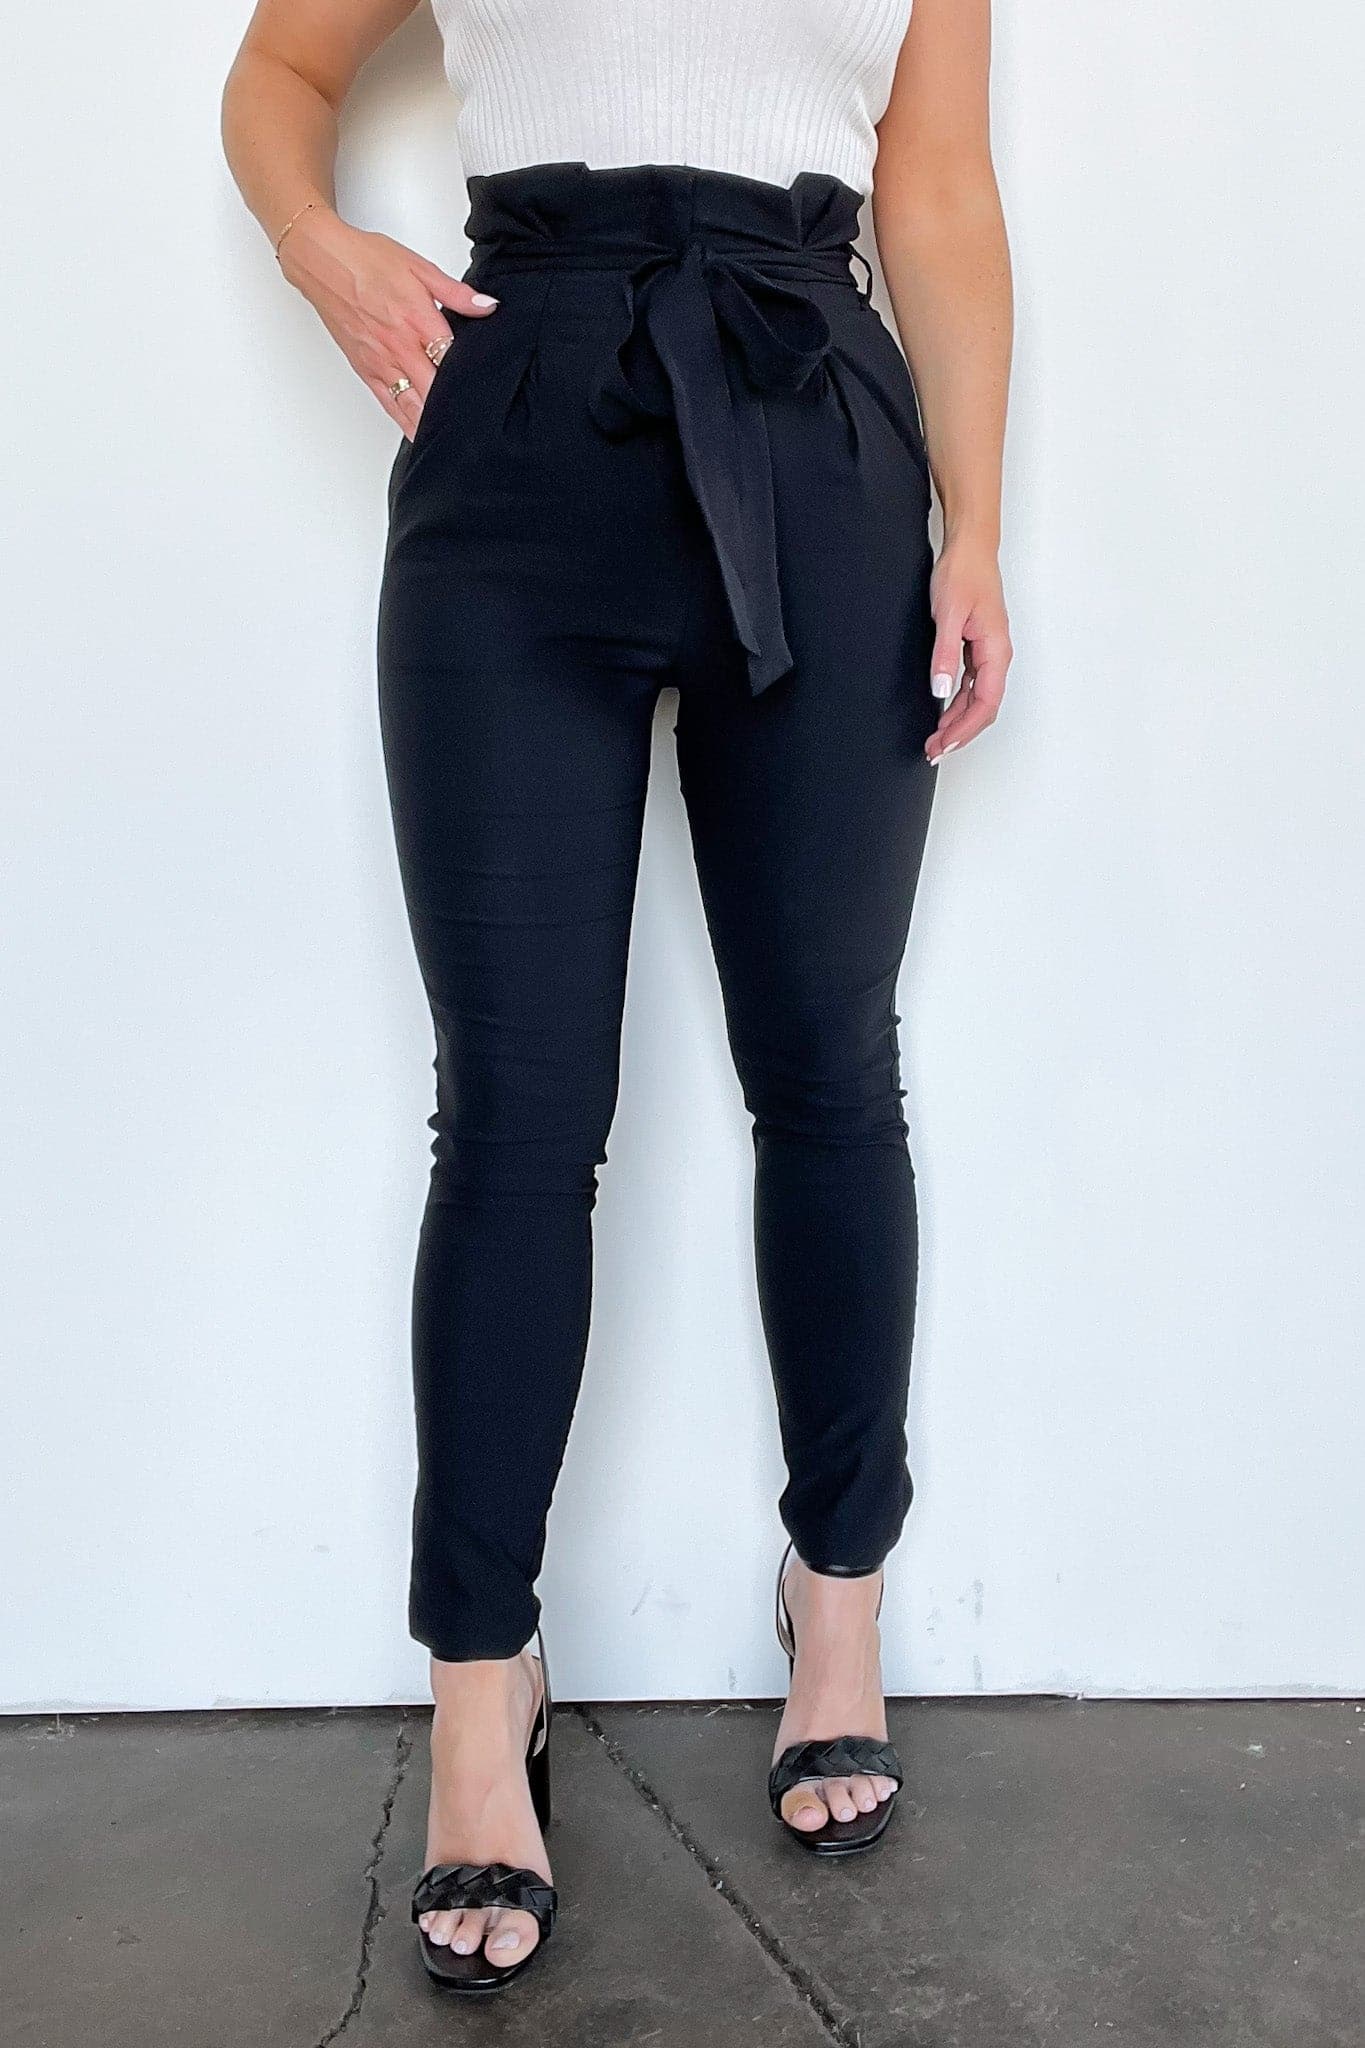 Black / S Riona Ruffled Waist Tie Skinny Pants - BACK IN STOCK - Madison and Mallory